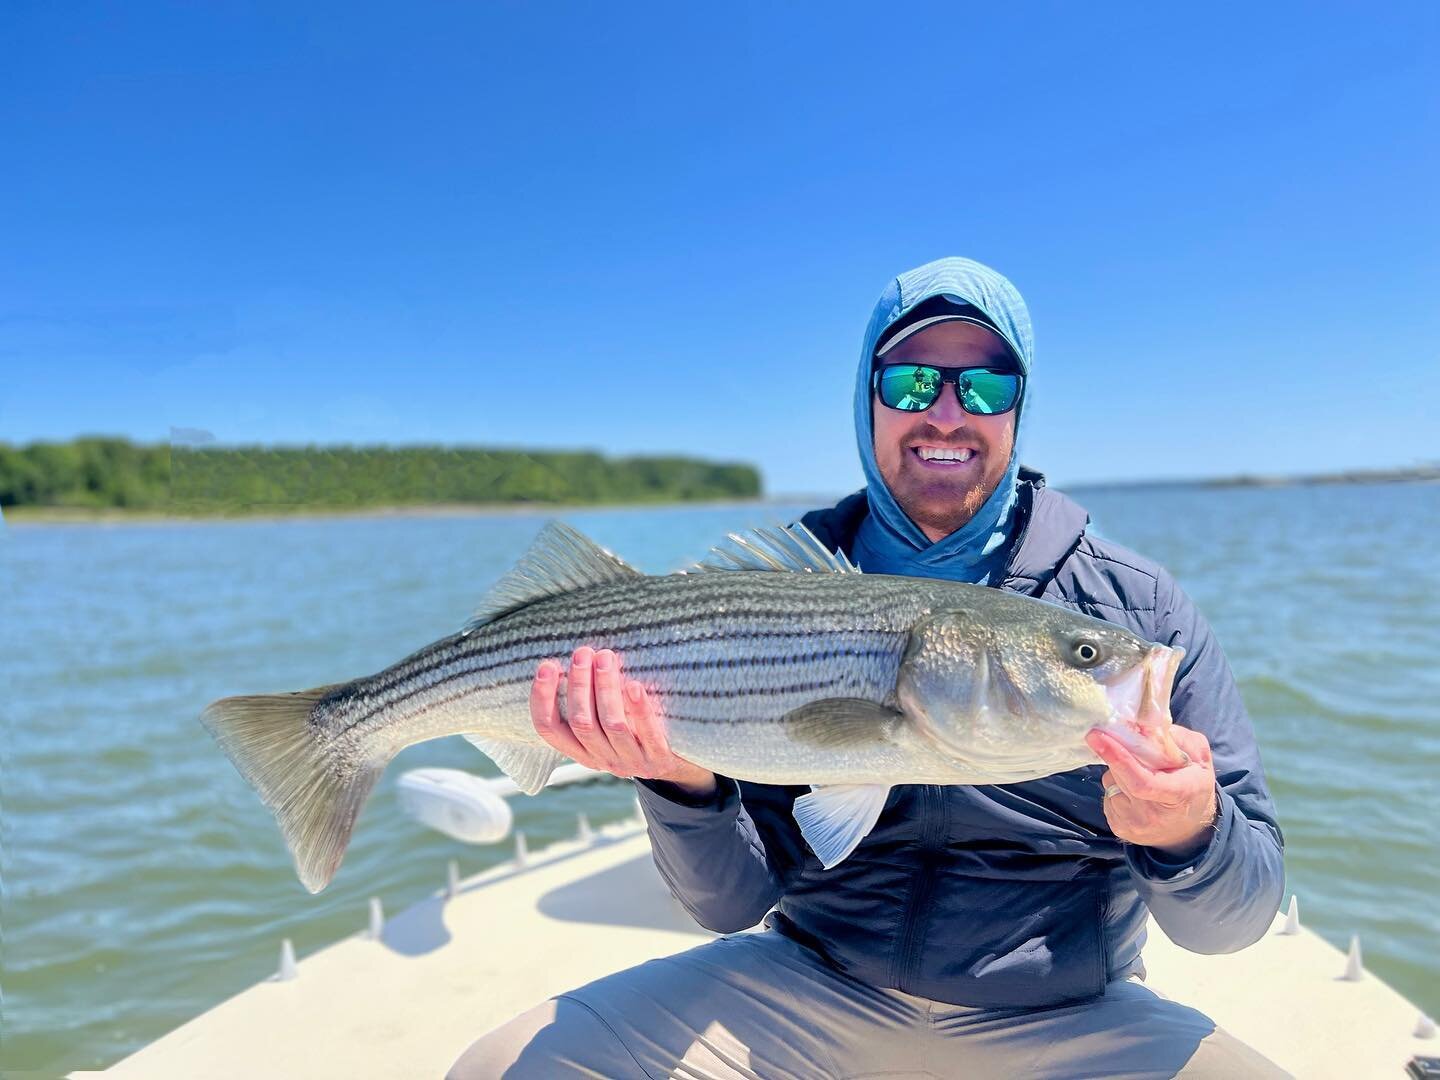 Josh with his first striper, first saltwater specie &amp; his PB fish on fly. Some gnarly winds but his smile says it all! #liveyourpassion